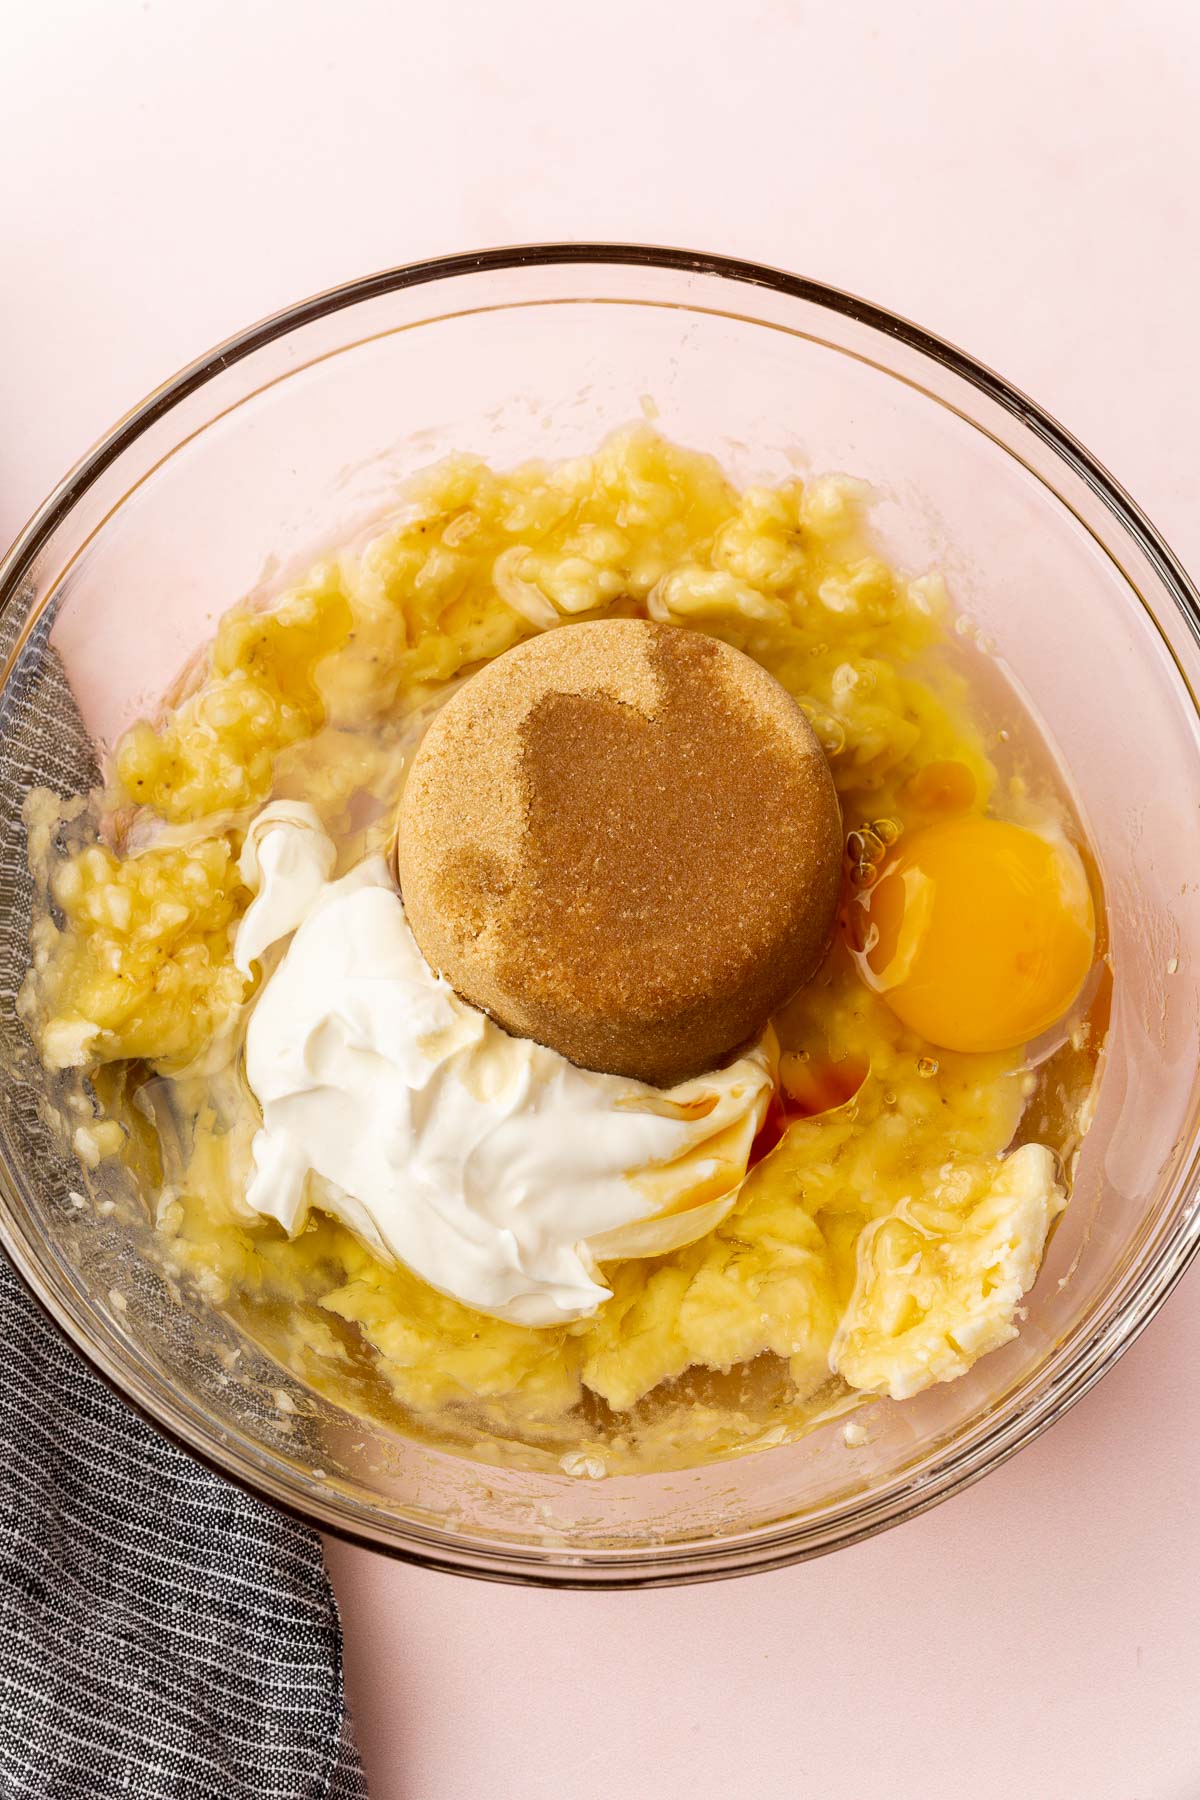 A glass mixing bowl with mashed banana topped with brown sugar, sour cream, oil, egg, and vanilla before whisking together.